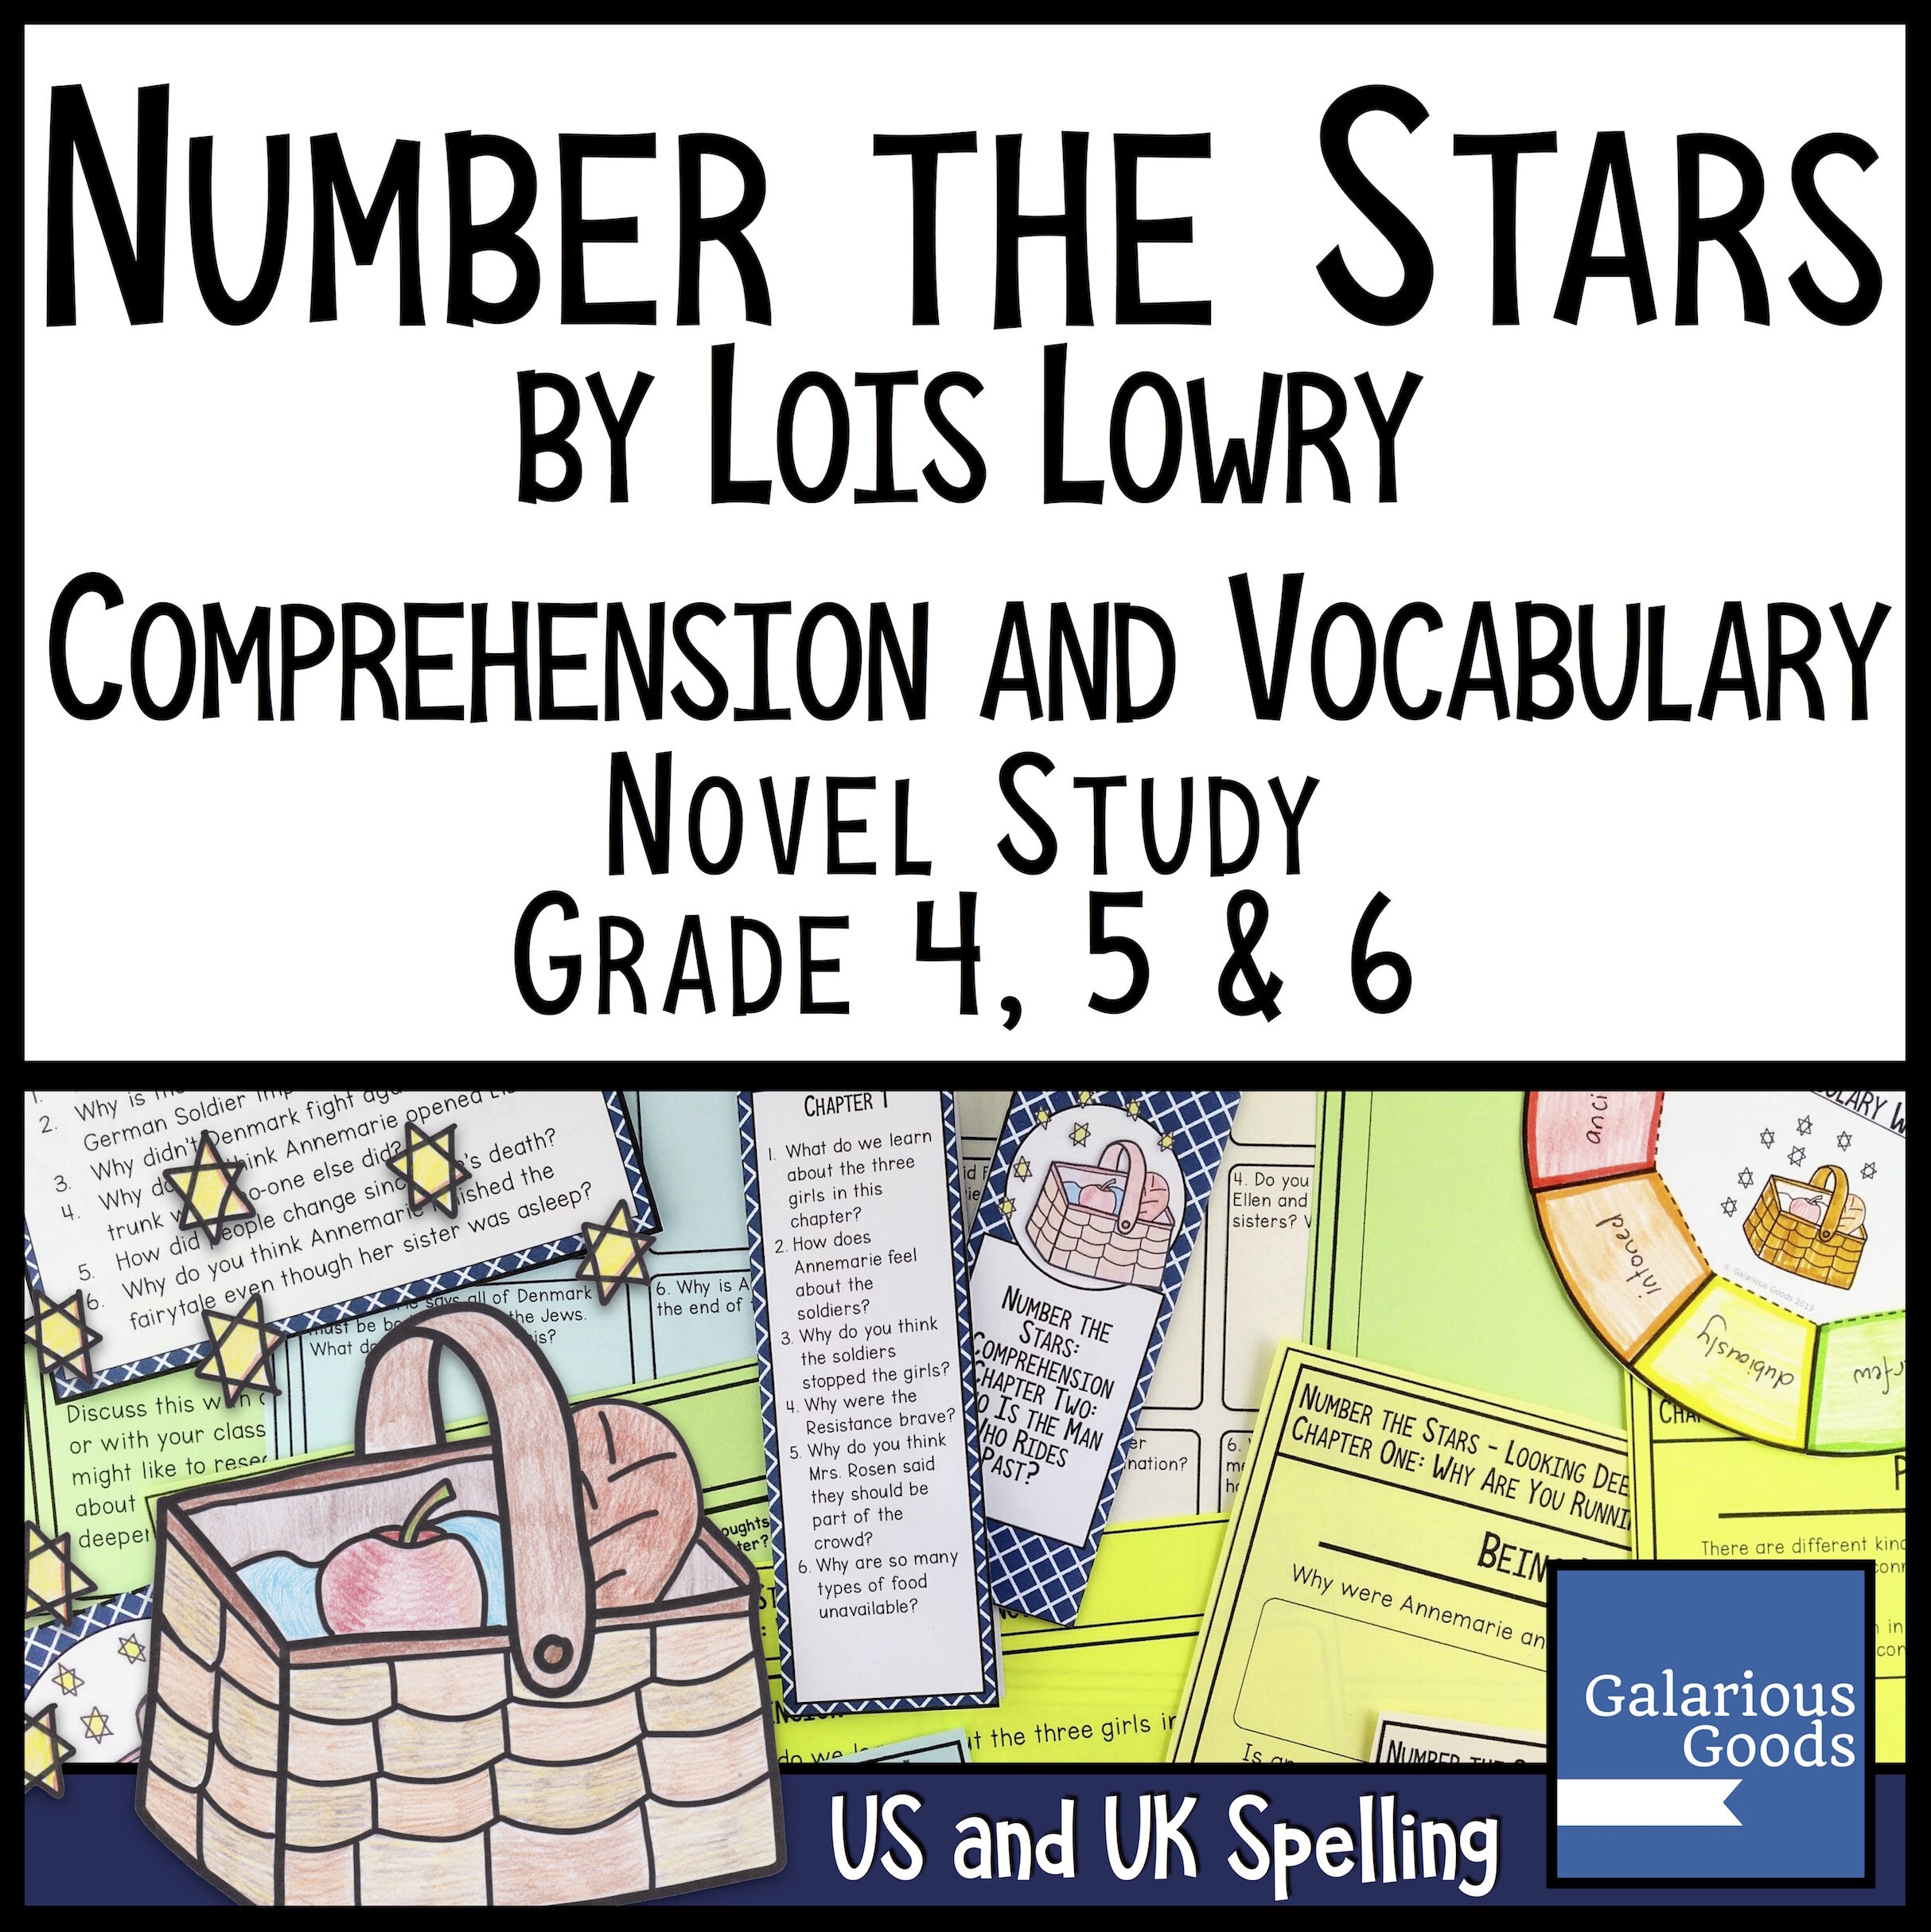 cover number the stars comprehension and vocab.jpg